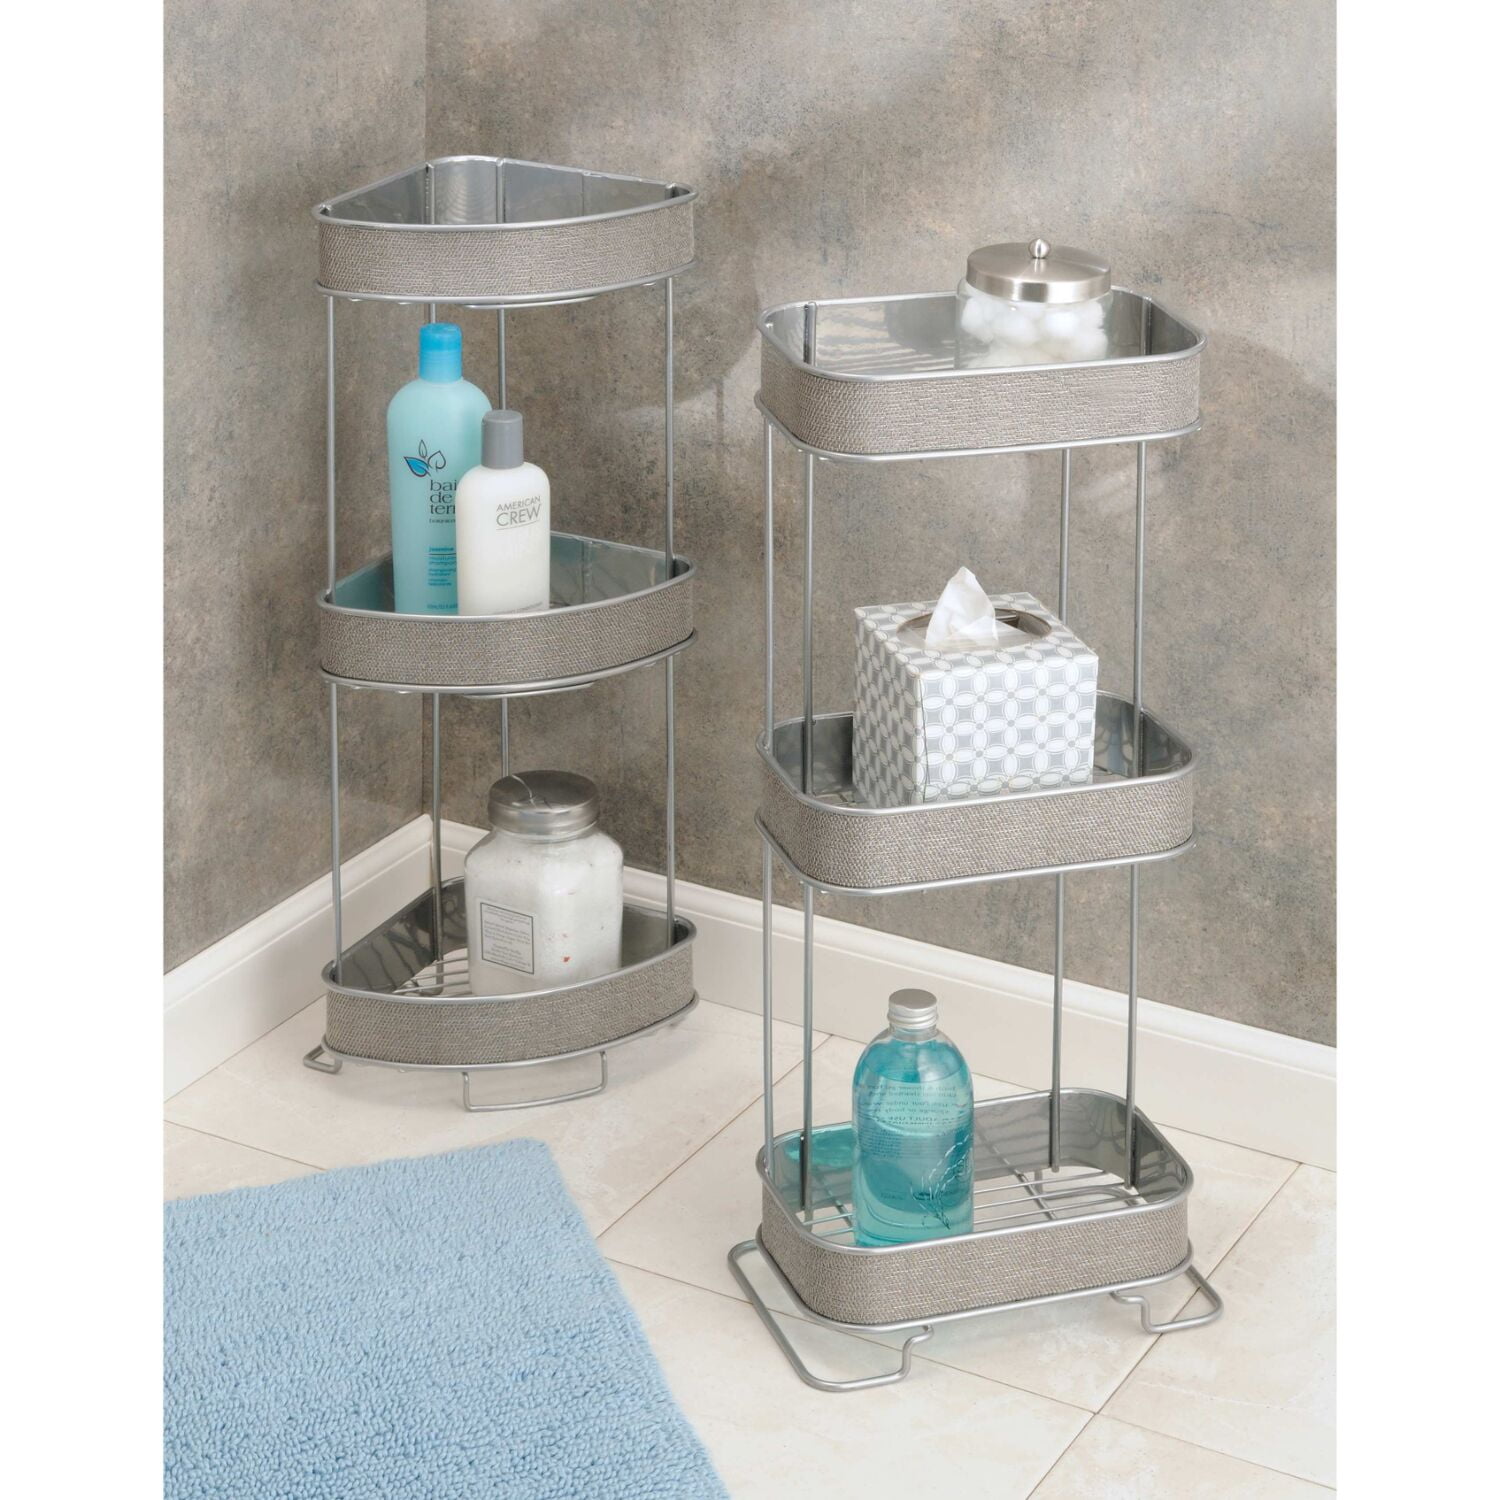 Elegant Home Fashions 3-Tiered Chrome Shower Caddy - Macy's